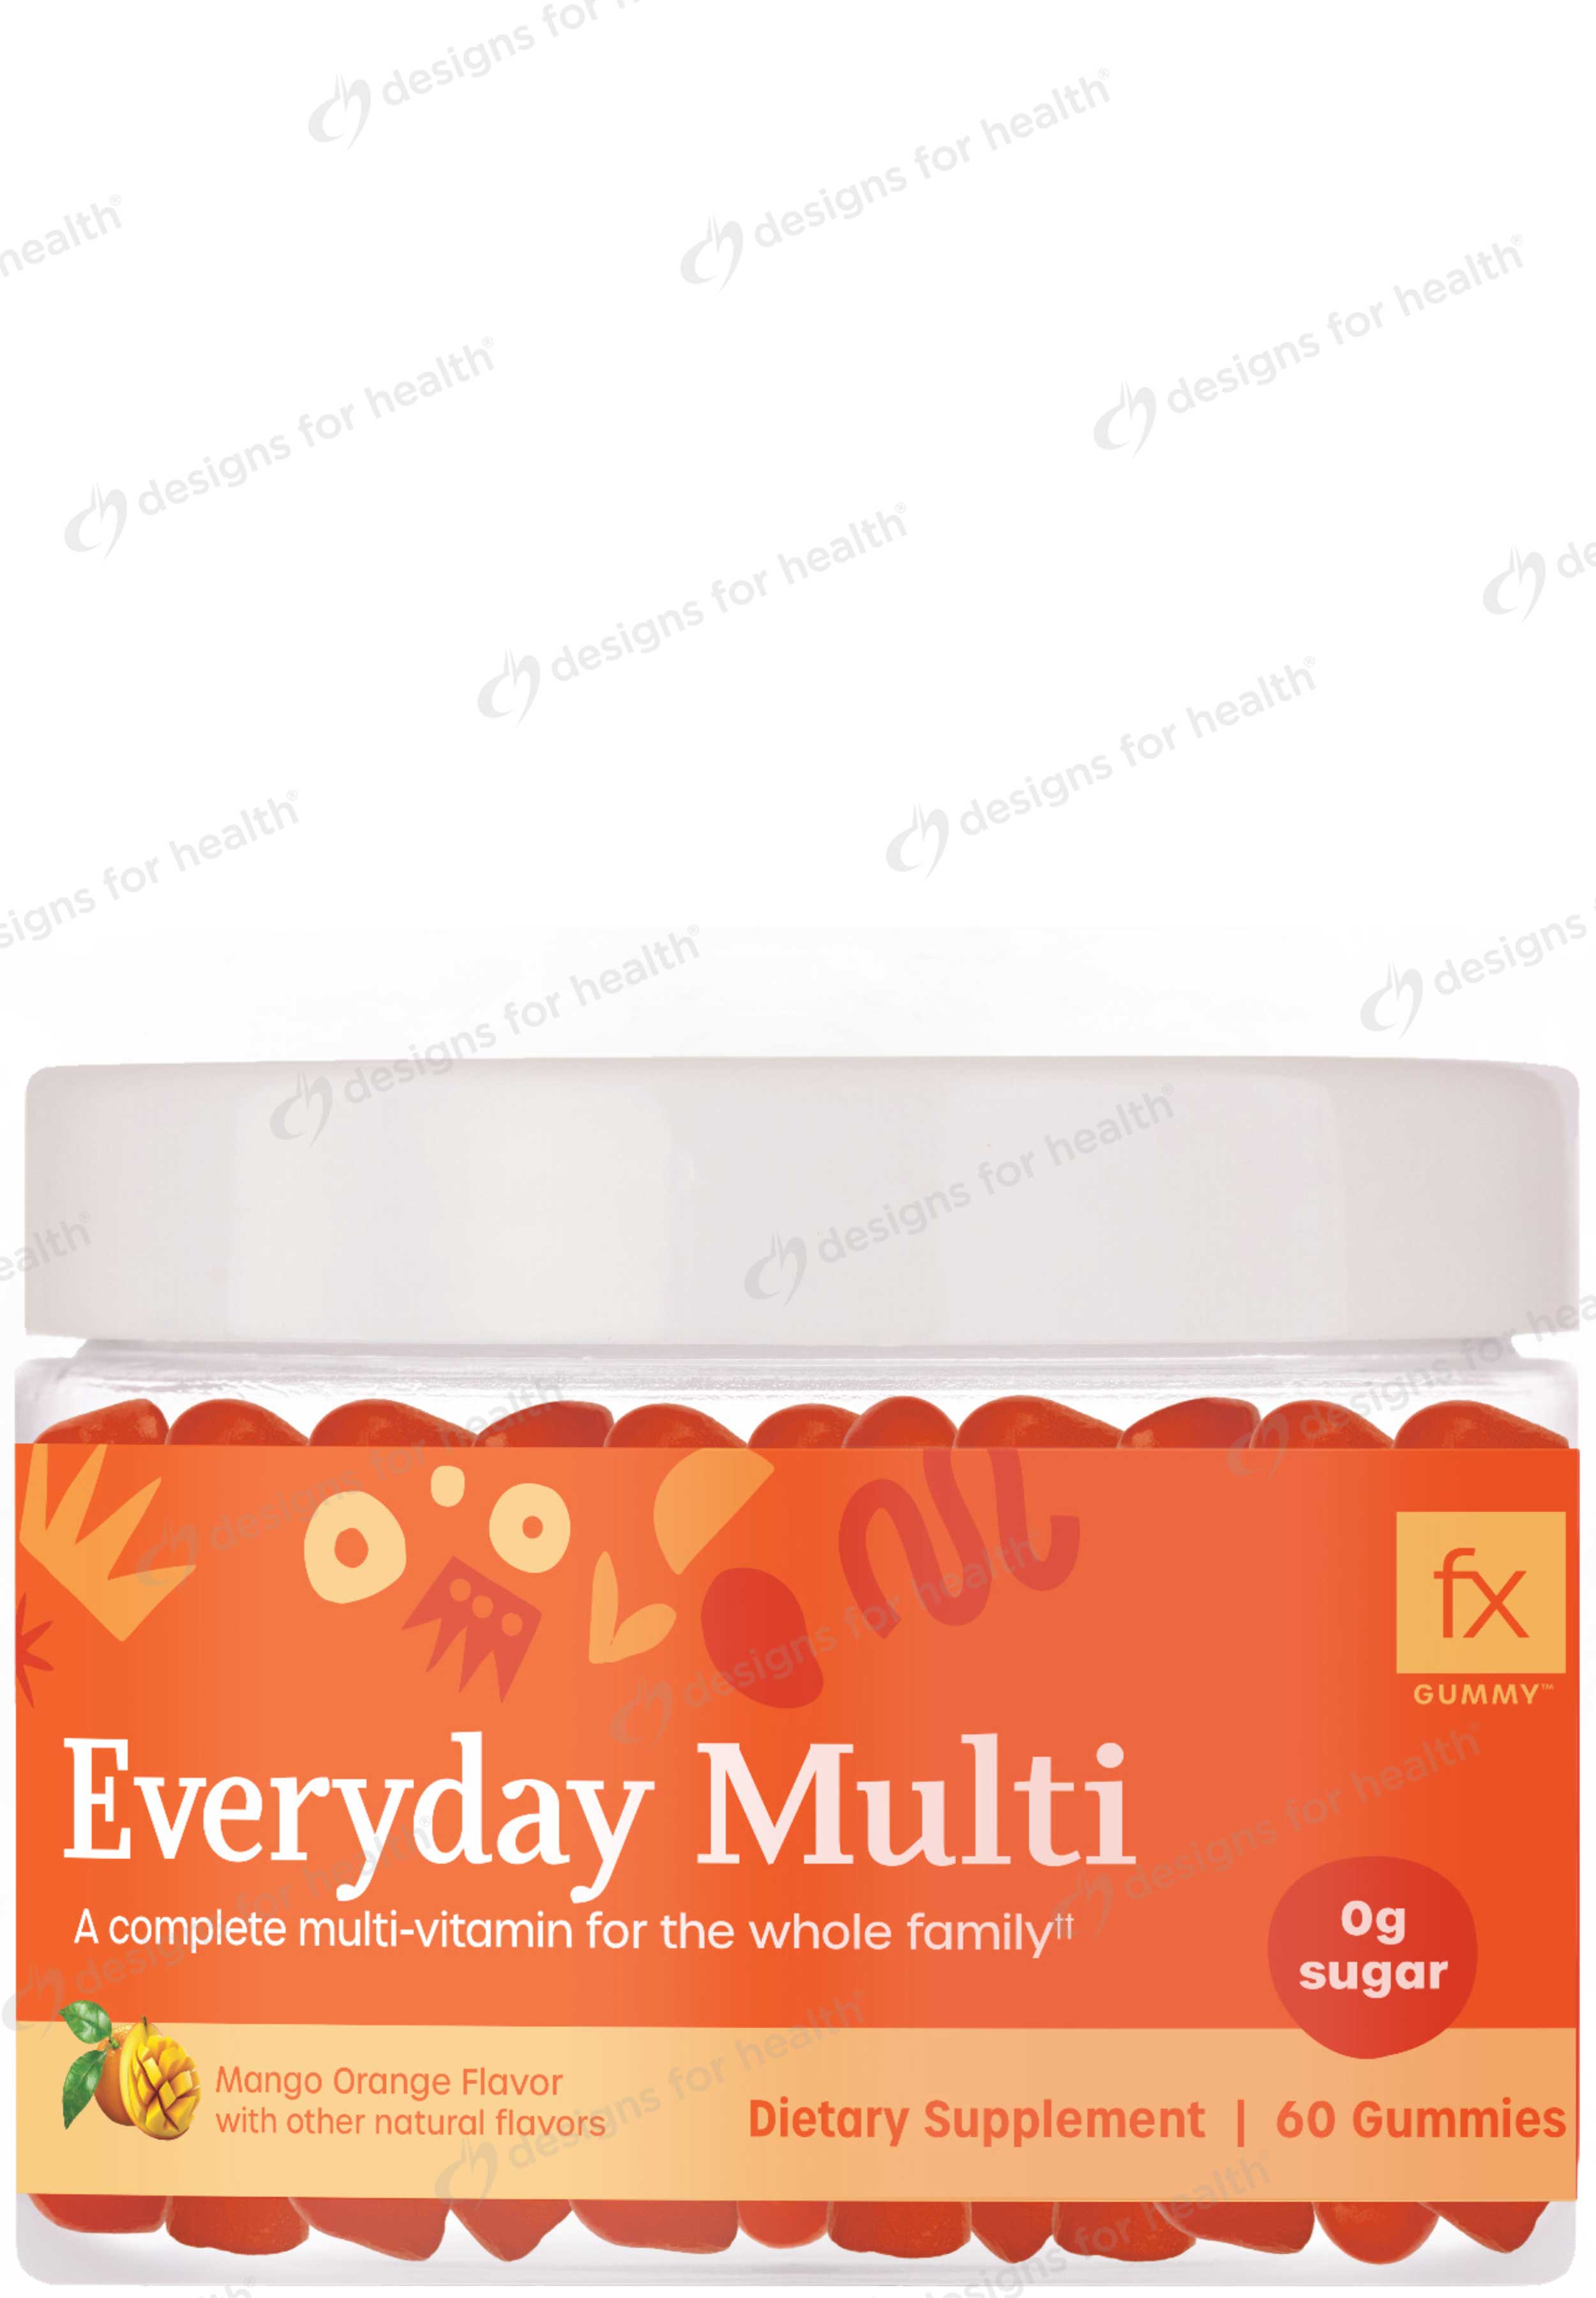 Designs for Health Everyday Multi